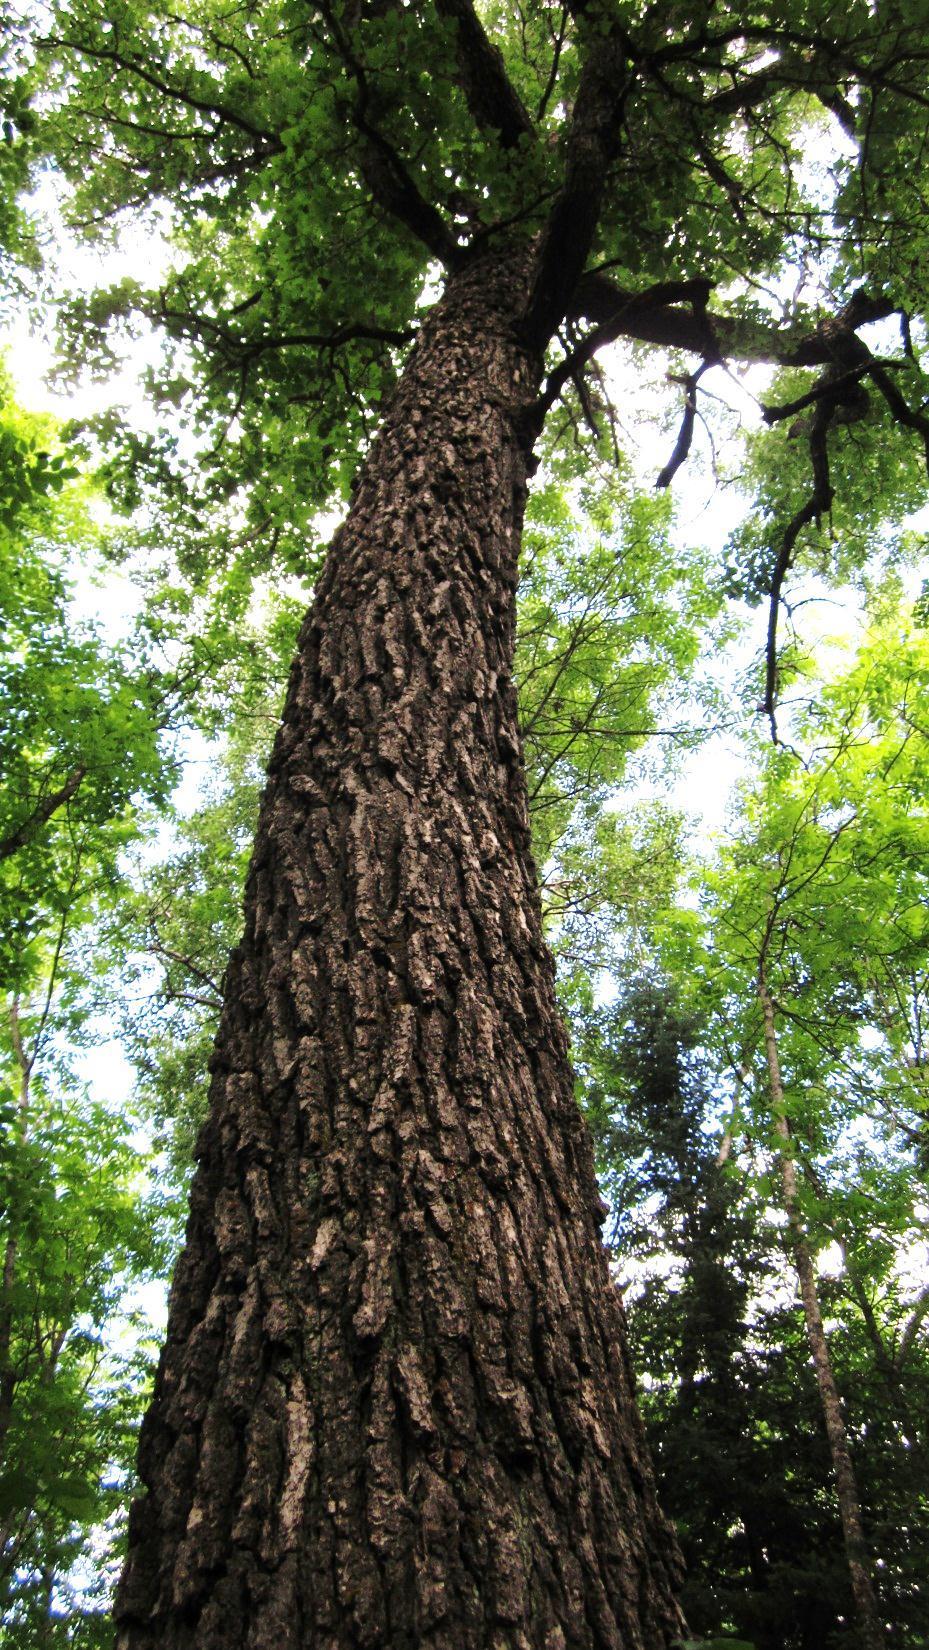 Ranking potential replacement species: This study Ash Management Guidelines for Private Forest Landowners 1. Manchurian ash (not ranked) 2. Swamp white oak (not ranked) 3. American elm (3) 4.